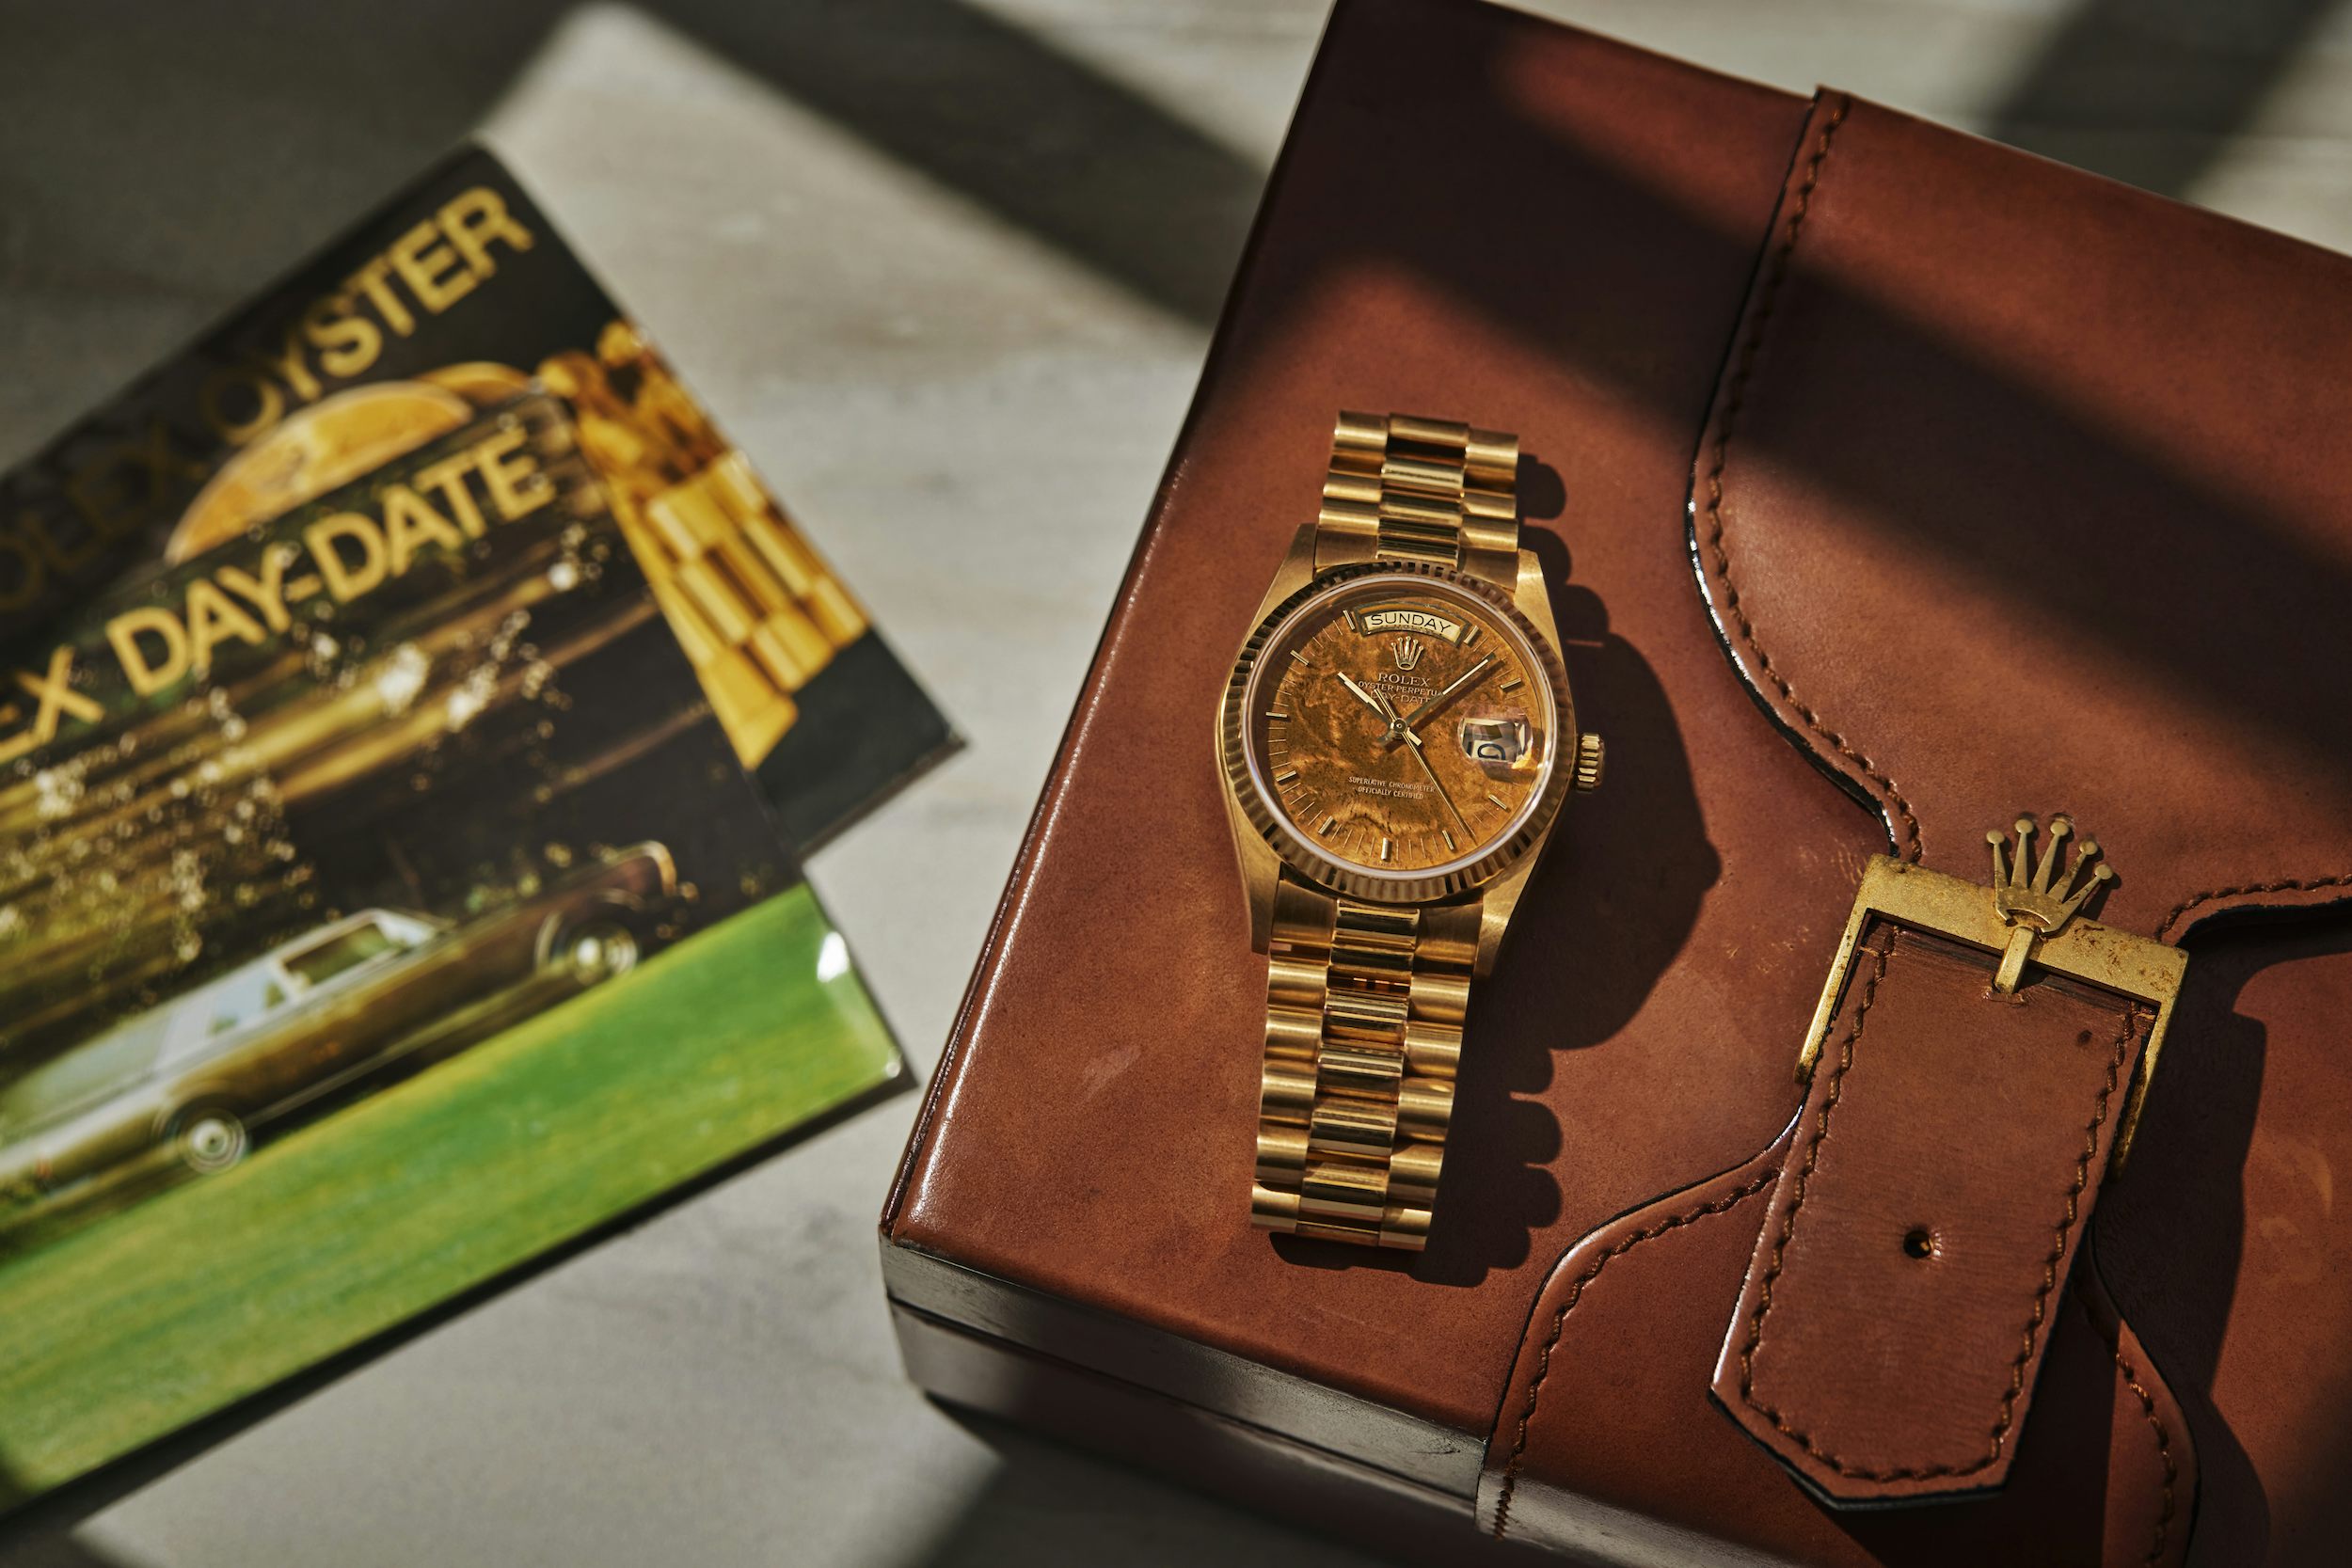 New Vintage Watches In The HODINKEE Shop